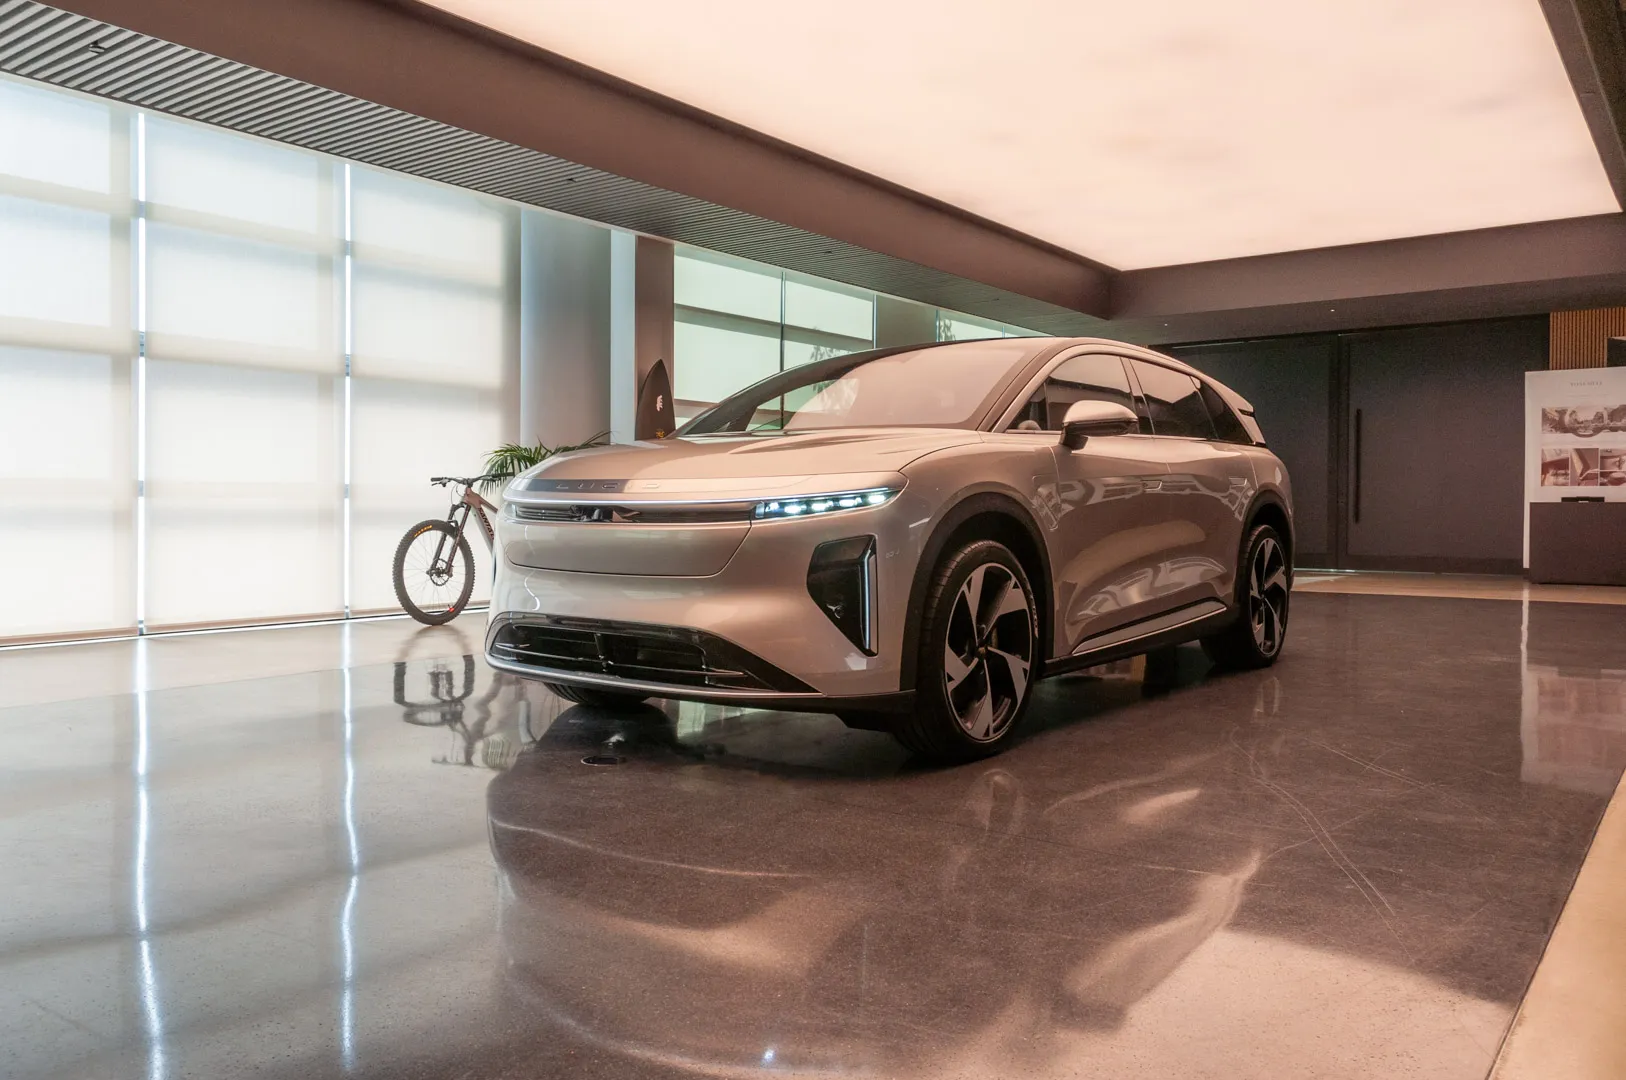 Lucid's Gravity electric SUV will have a max range of 440 miles